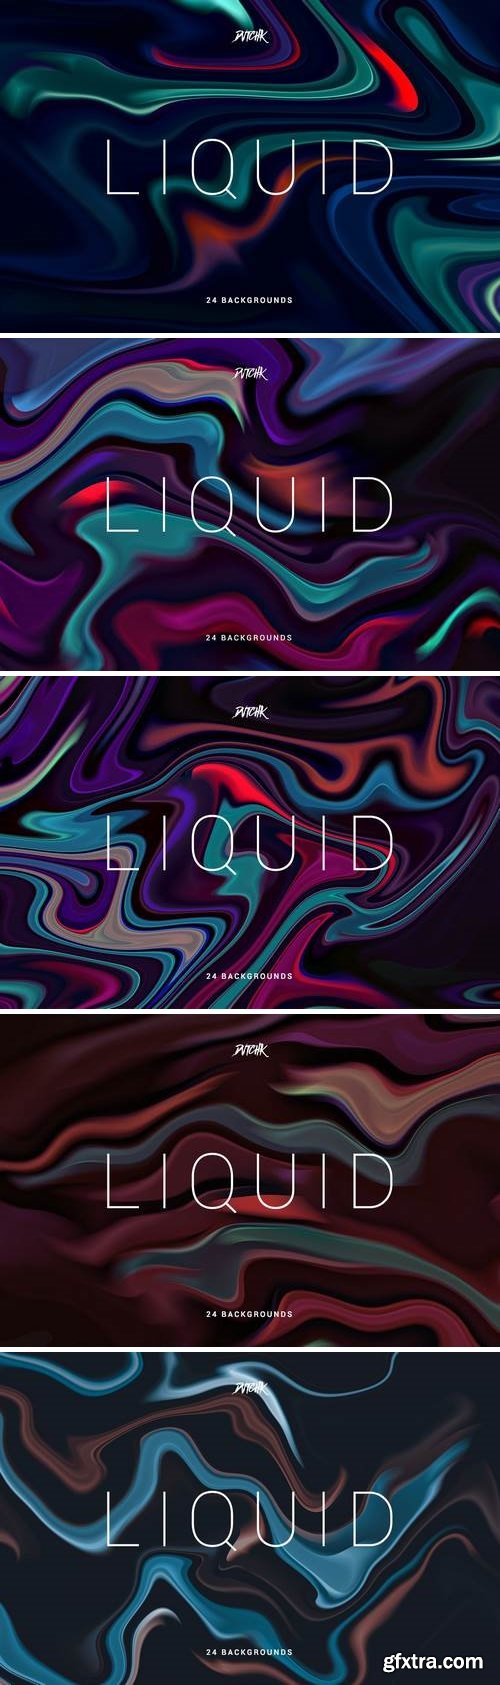 Liquid | Colorful Abstract Backgrounds